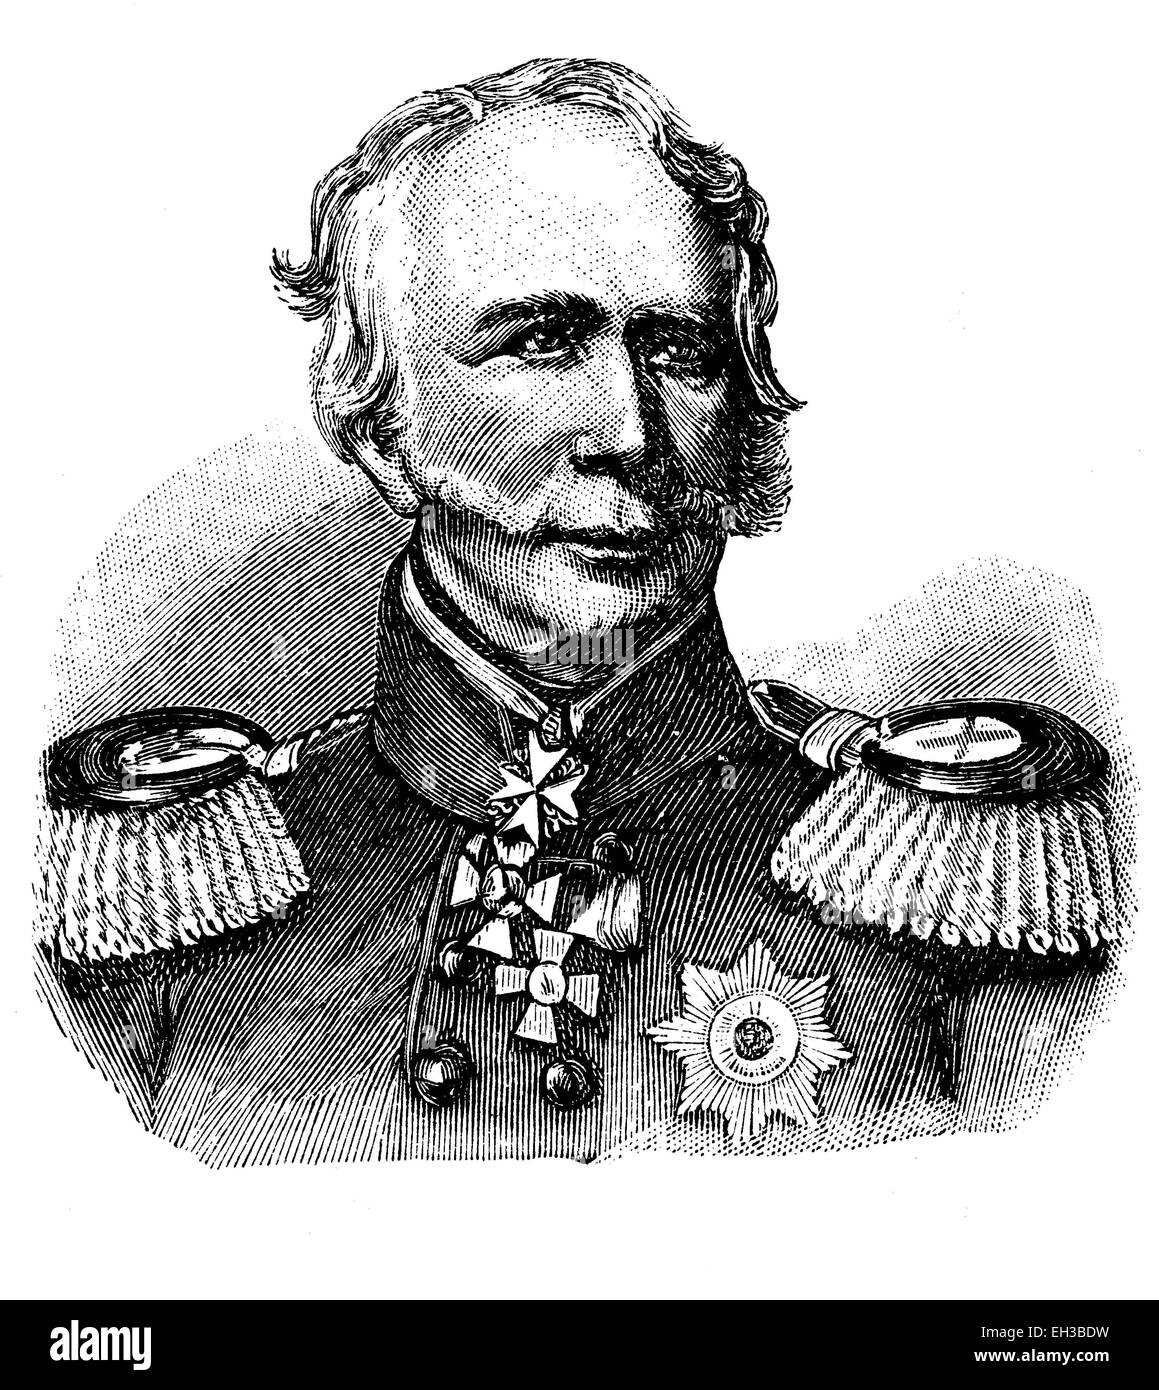 Leopold Hermann von Boyen, 1811 - 1886, a Prussian general of the infantry and governor of the fortress of Mainz and later of Berlin, wood engraving, about 1880 Stock Photo